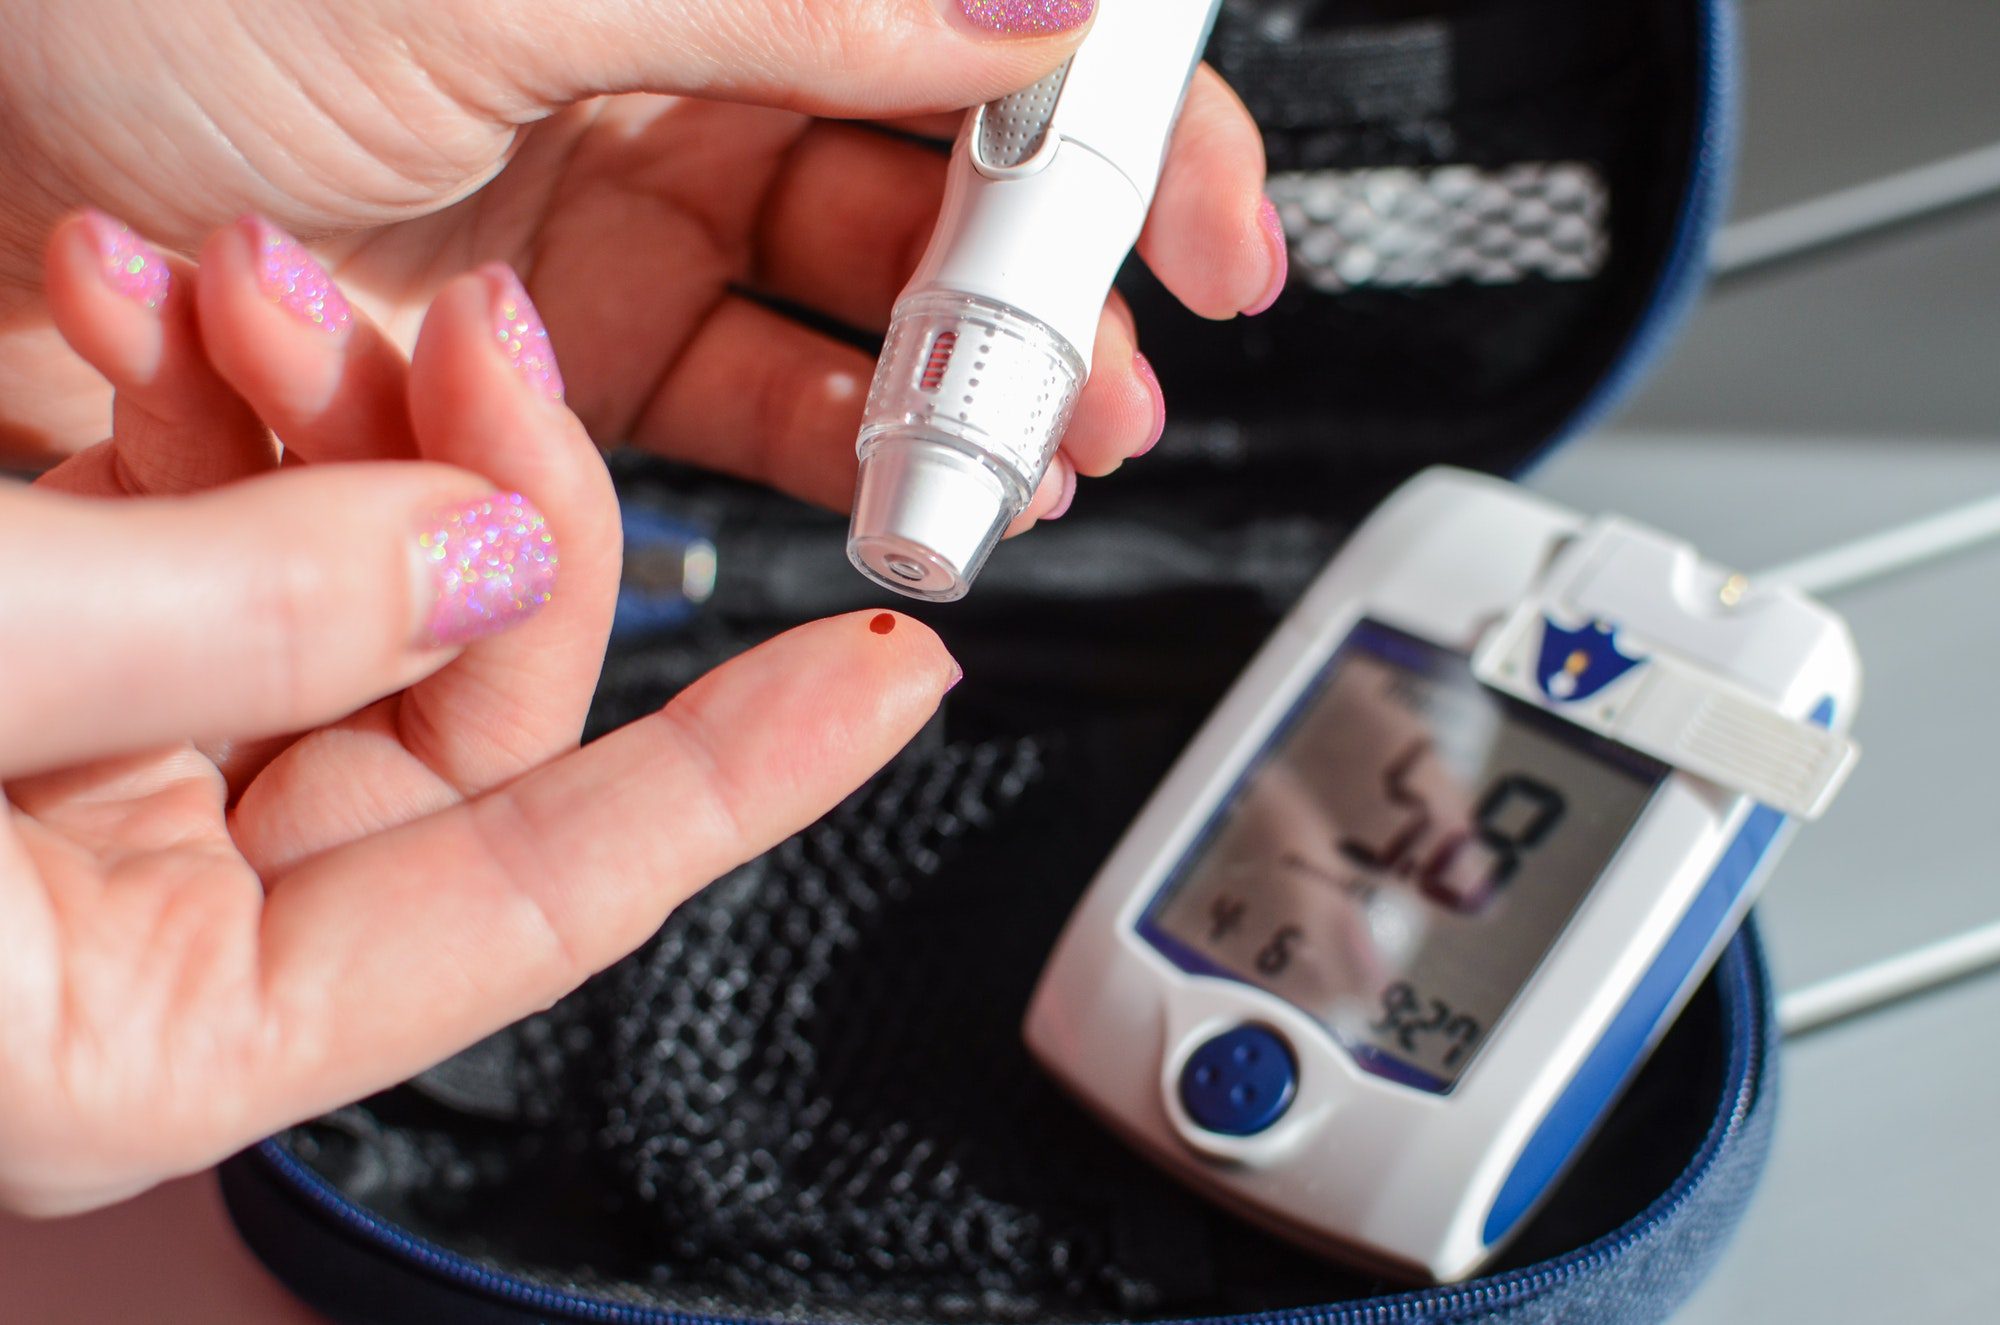 Medicare and Diabetic Supplies showing a Blood glucose meter pricking a finger.